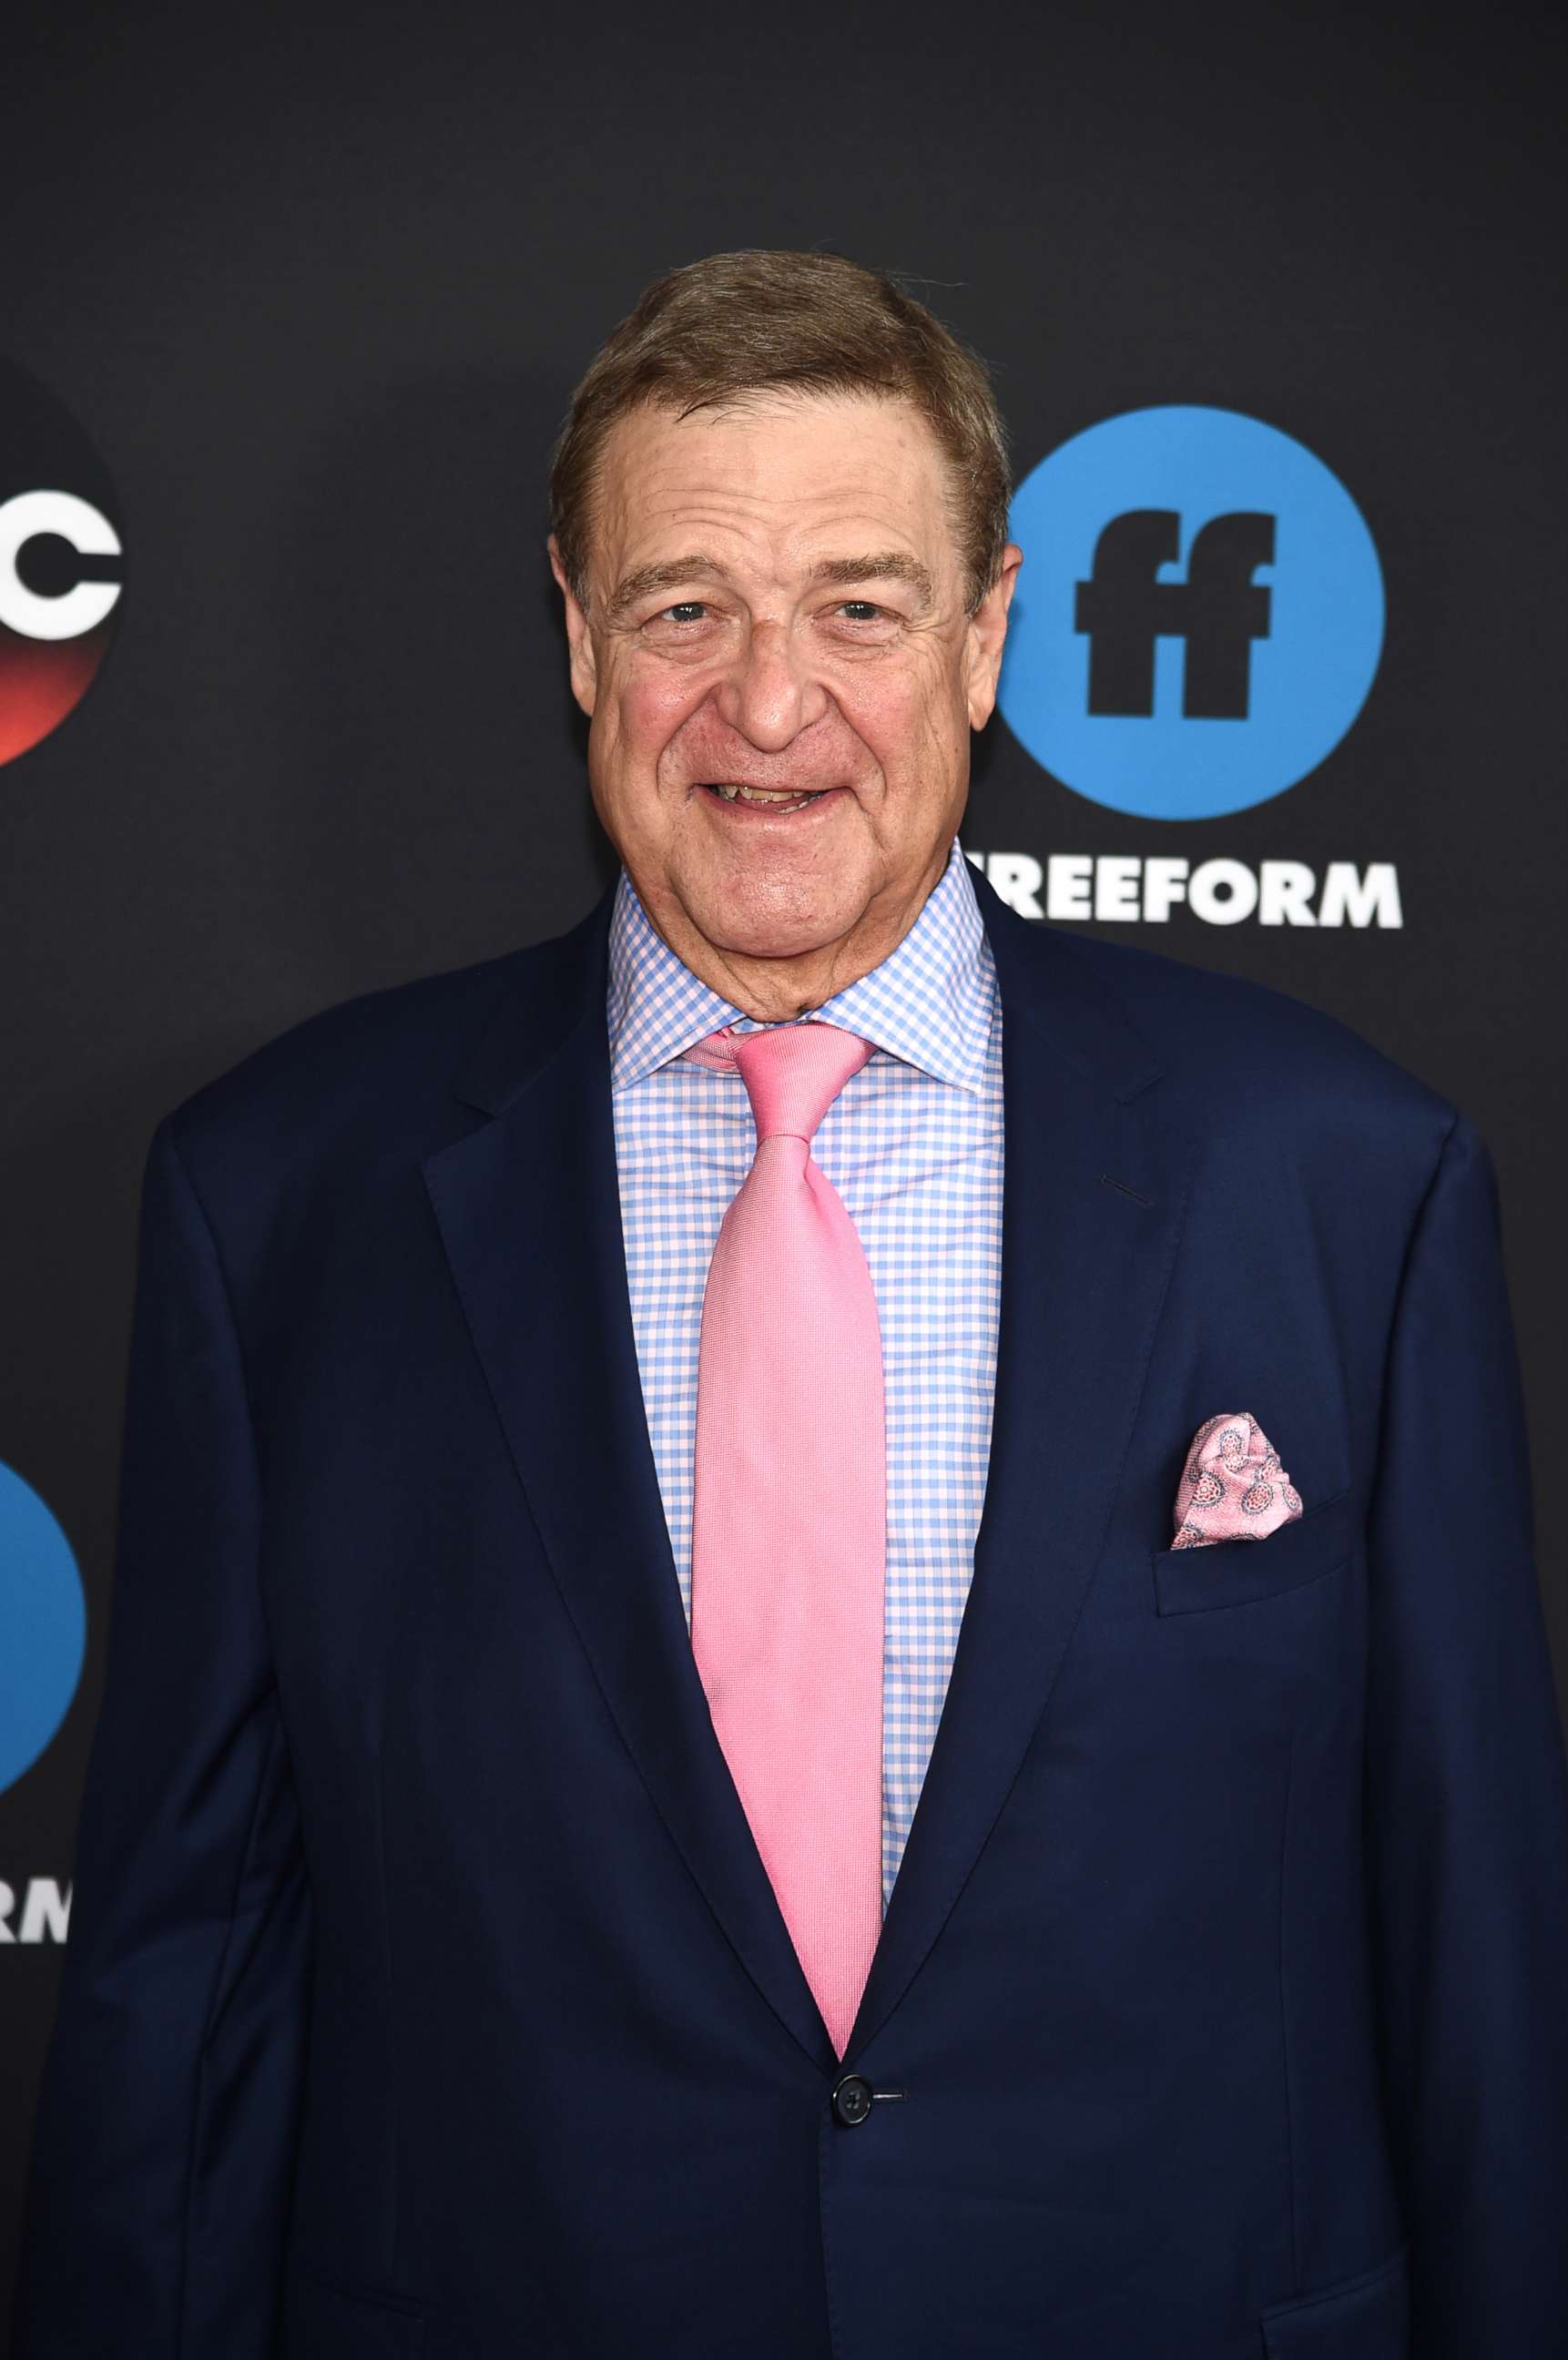 PHOTO: John Goodman attends the 2018 Disney, ABC, Freeform Upfront at Tavern On The Green, May 15, 2018, in New York City.